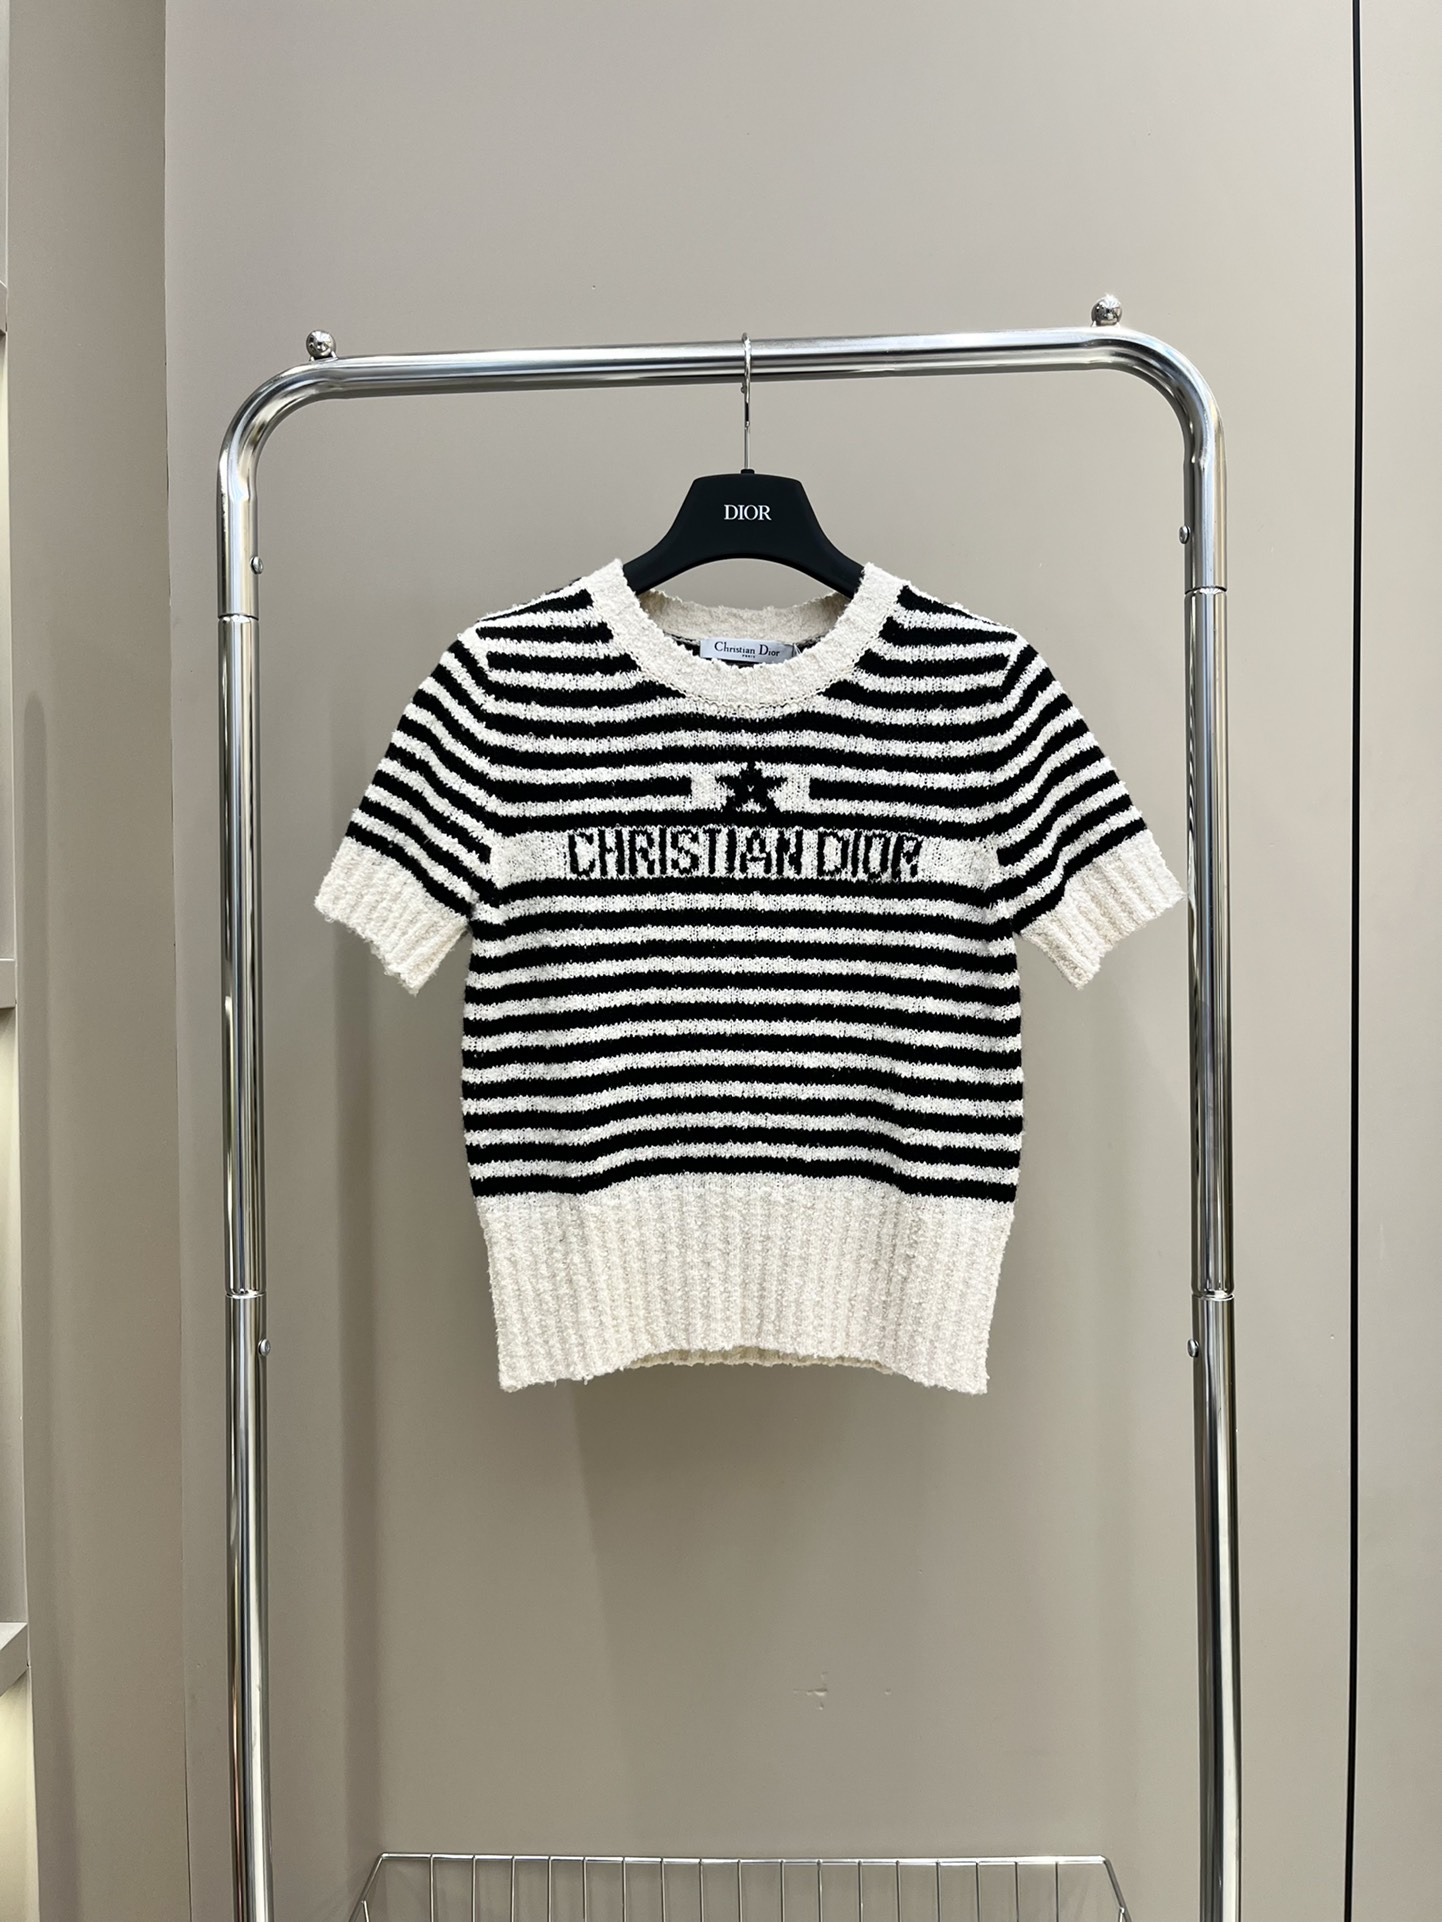 Dior Clothing Shirts & Blouses T-Shirt Black White Knitting Wool Fall Collection Short Sleeve